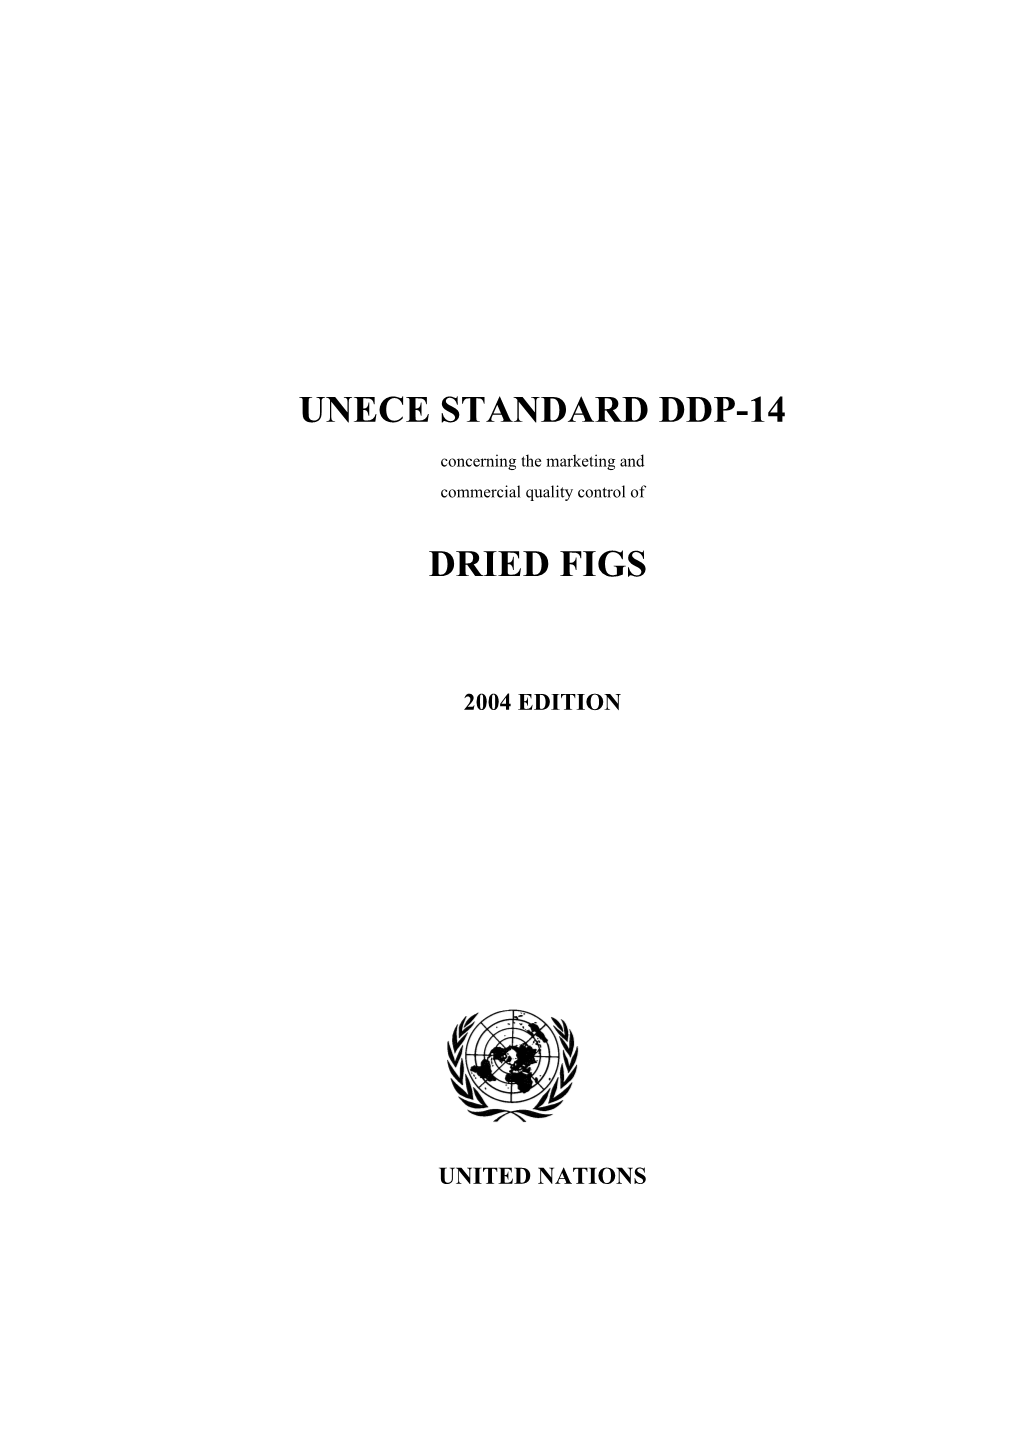 UNECE Standard for Dried Figs (DDP-14)